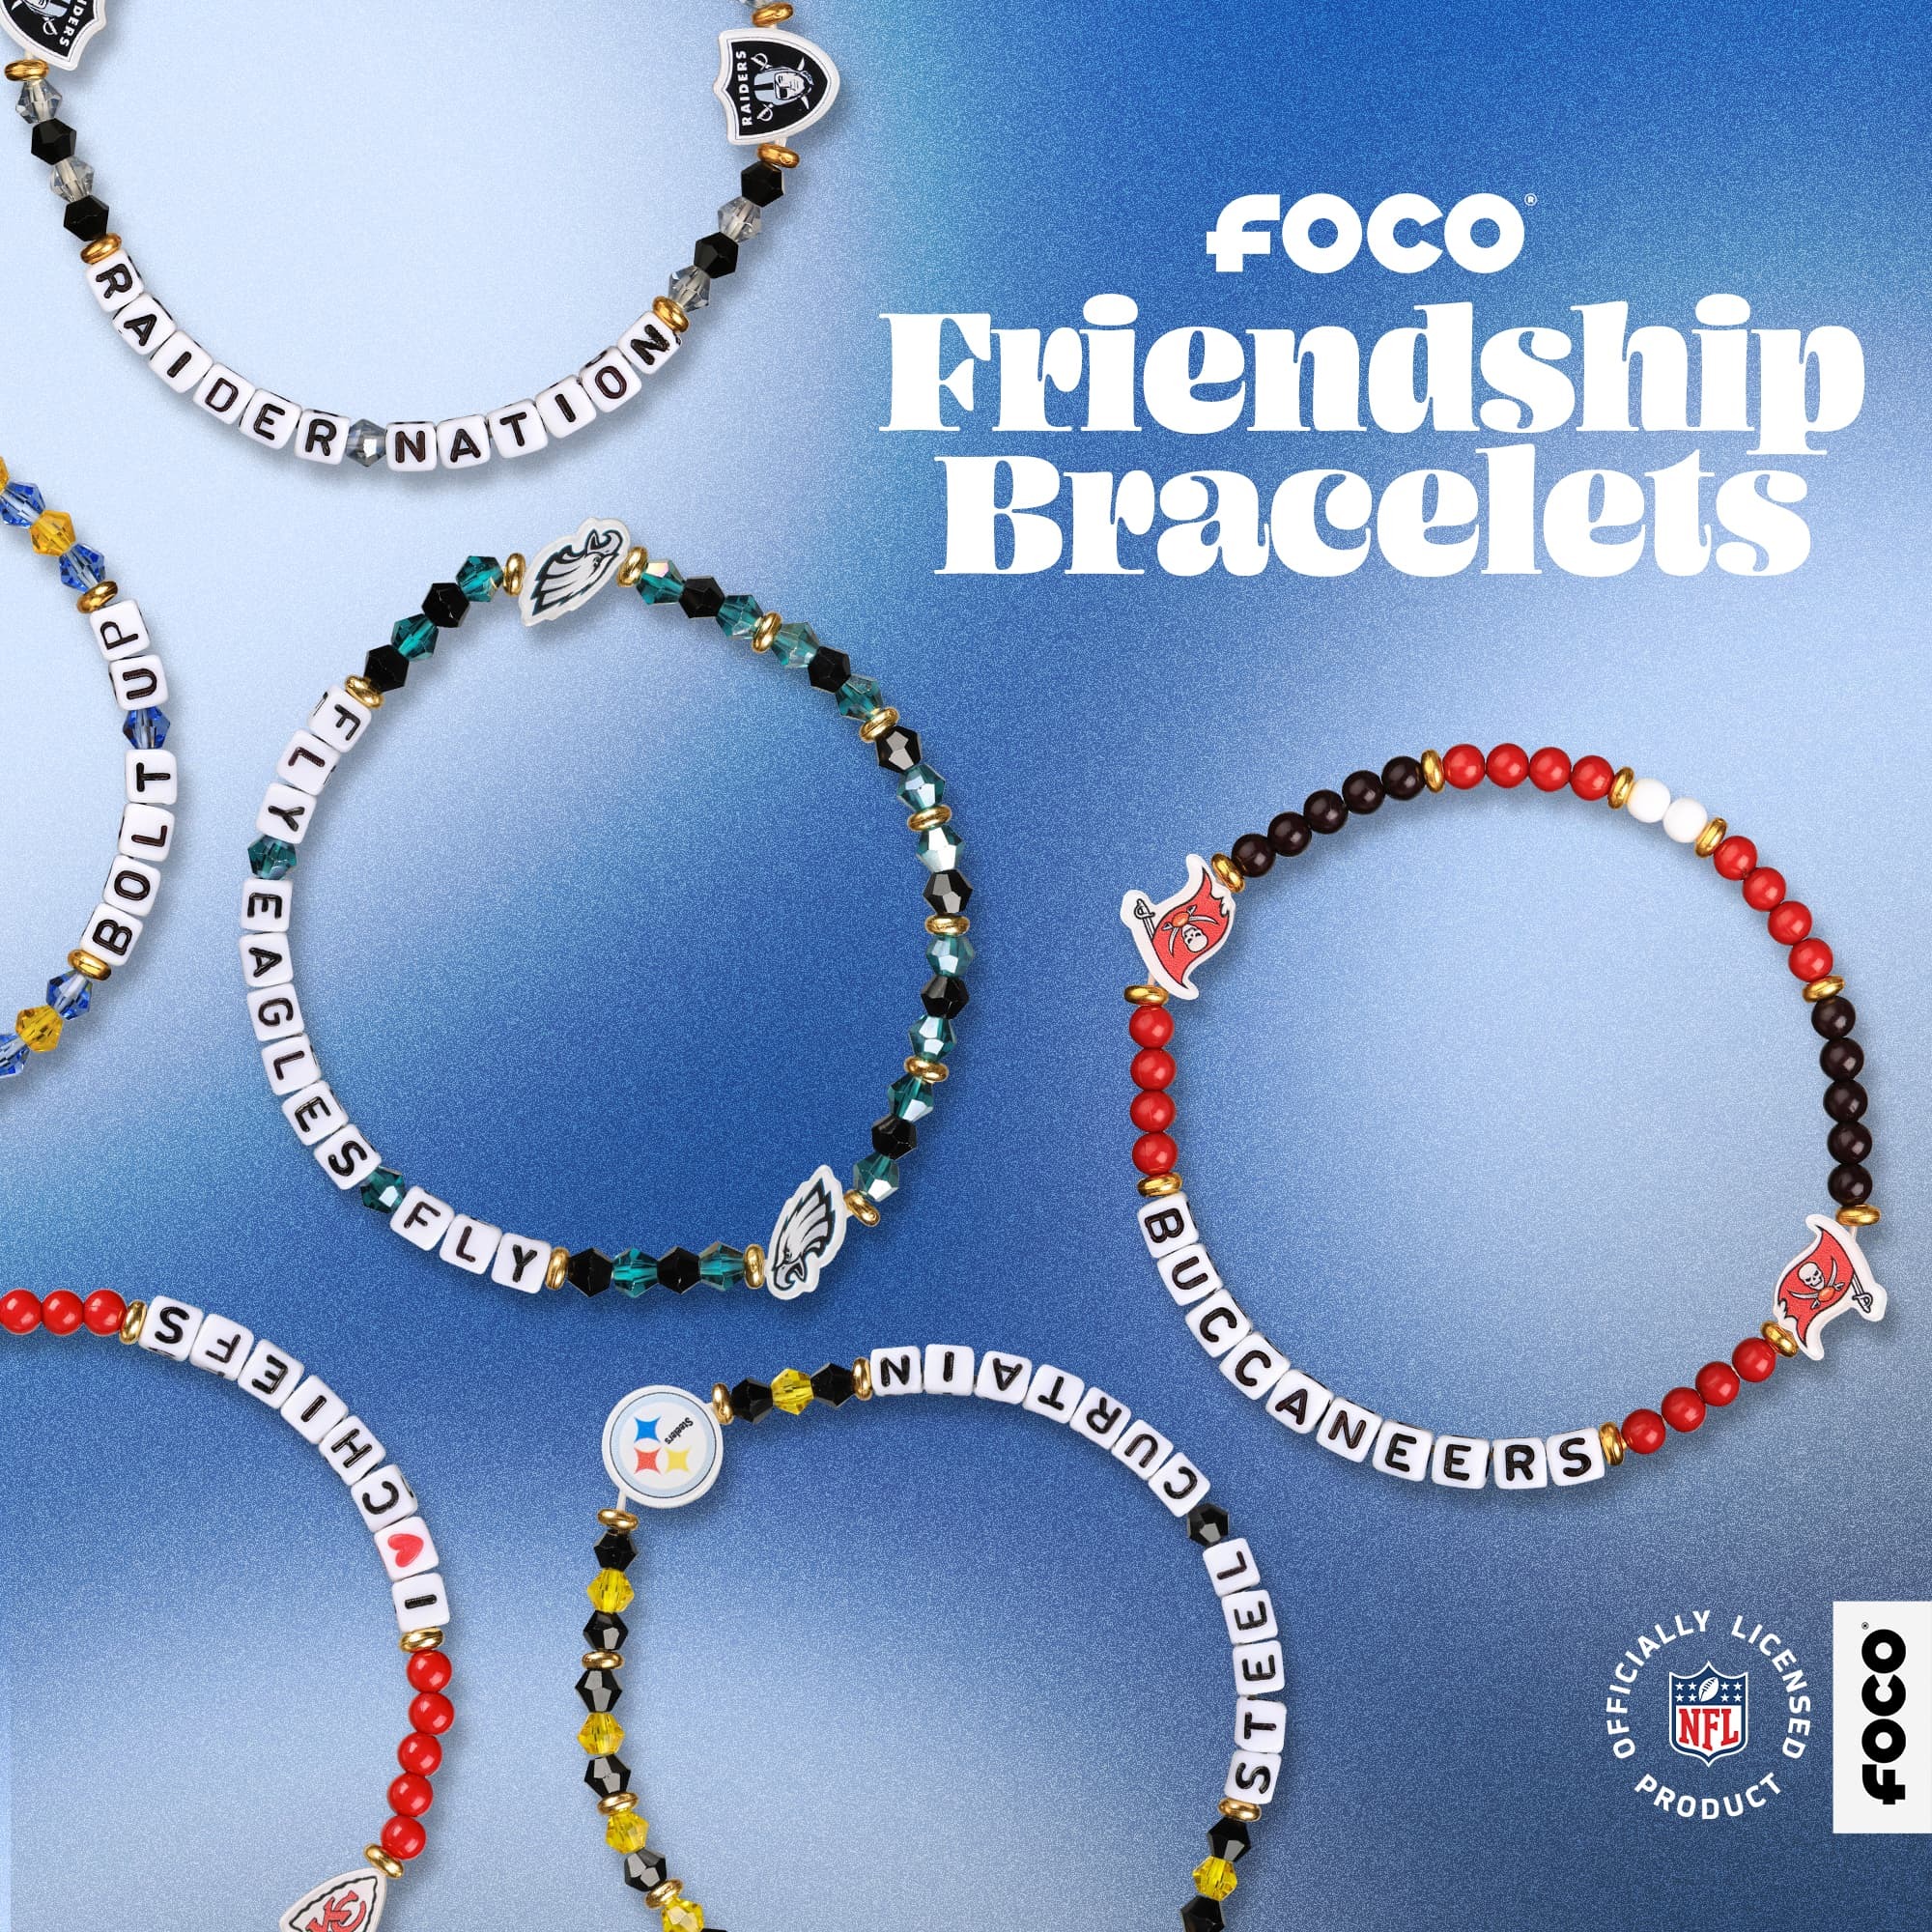 FOCO stretches into friendship bracelets with MLB teams and players 